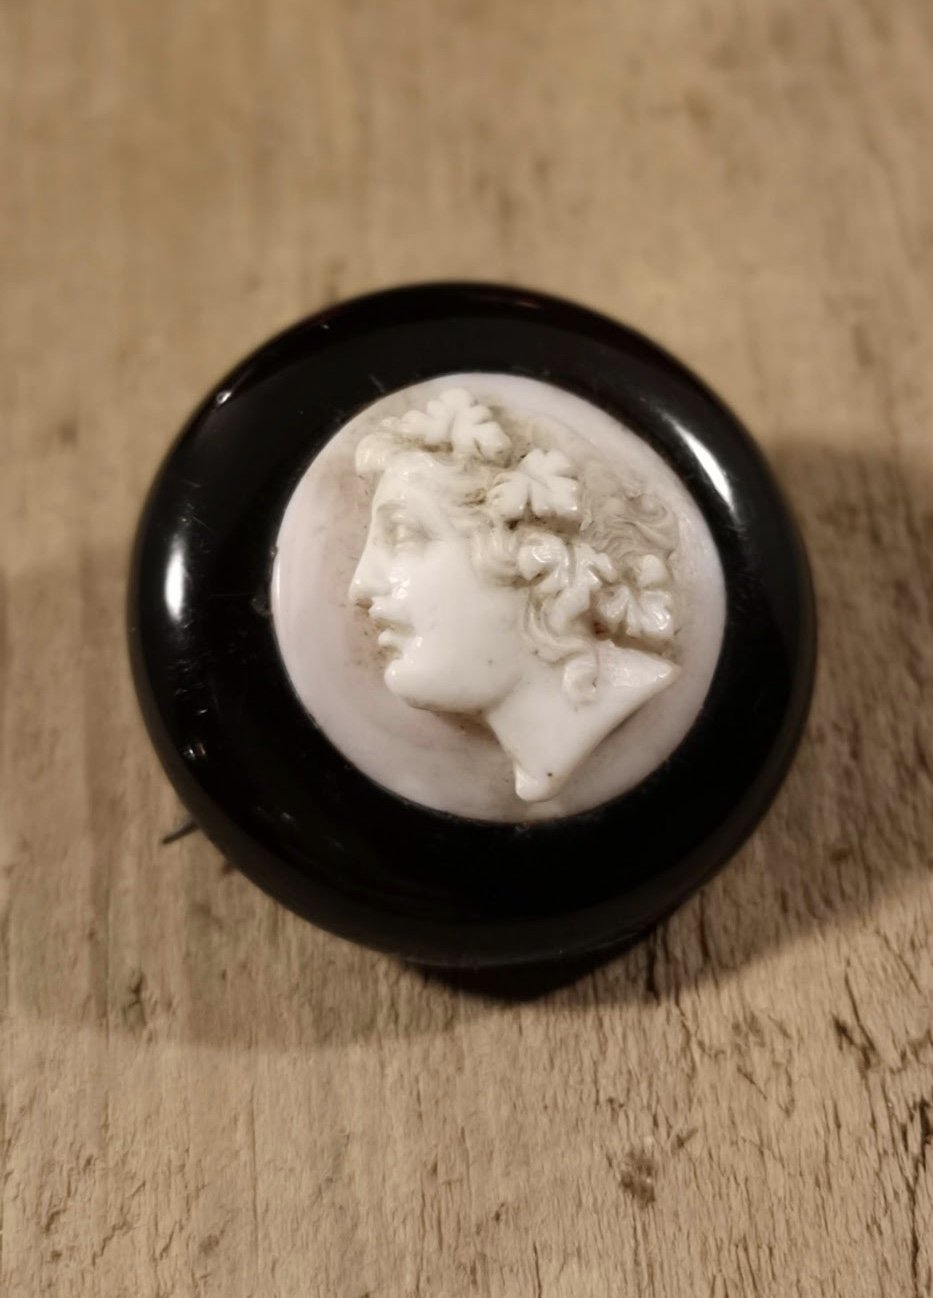 Antique Whitby Jet brooch “round shell cameo”